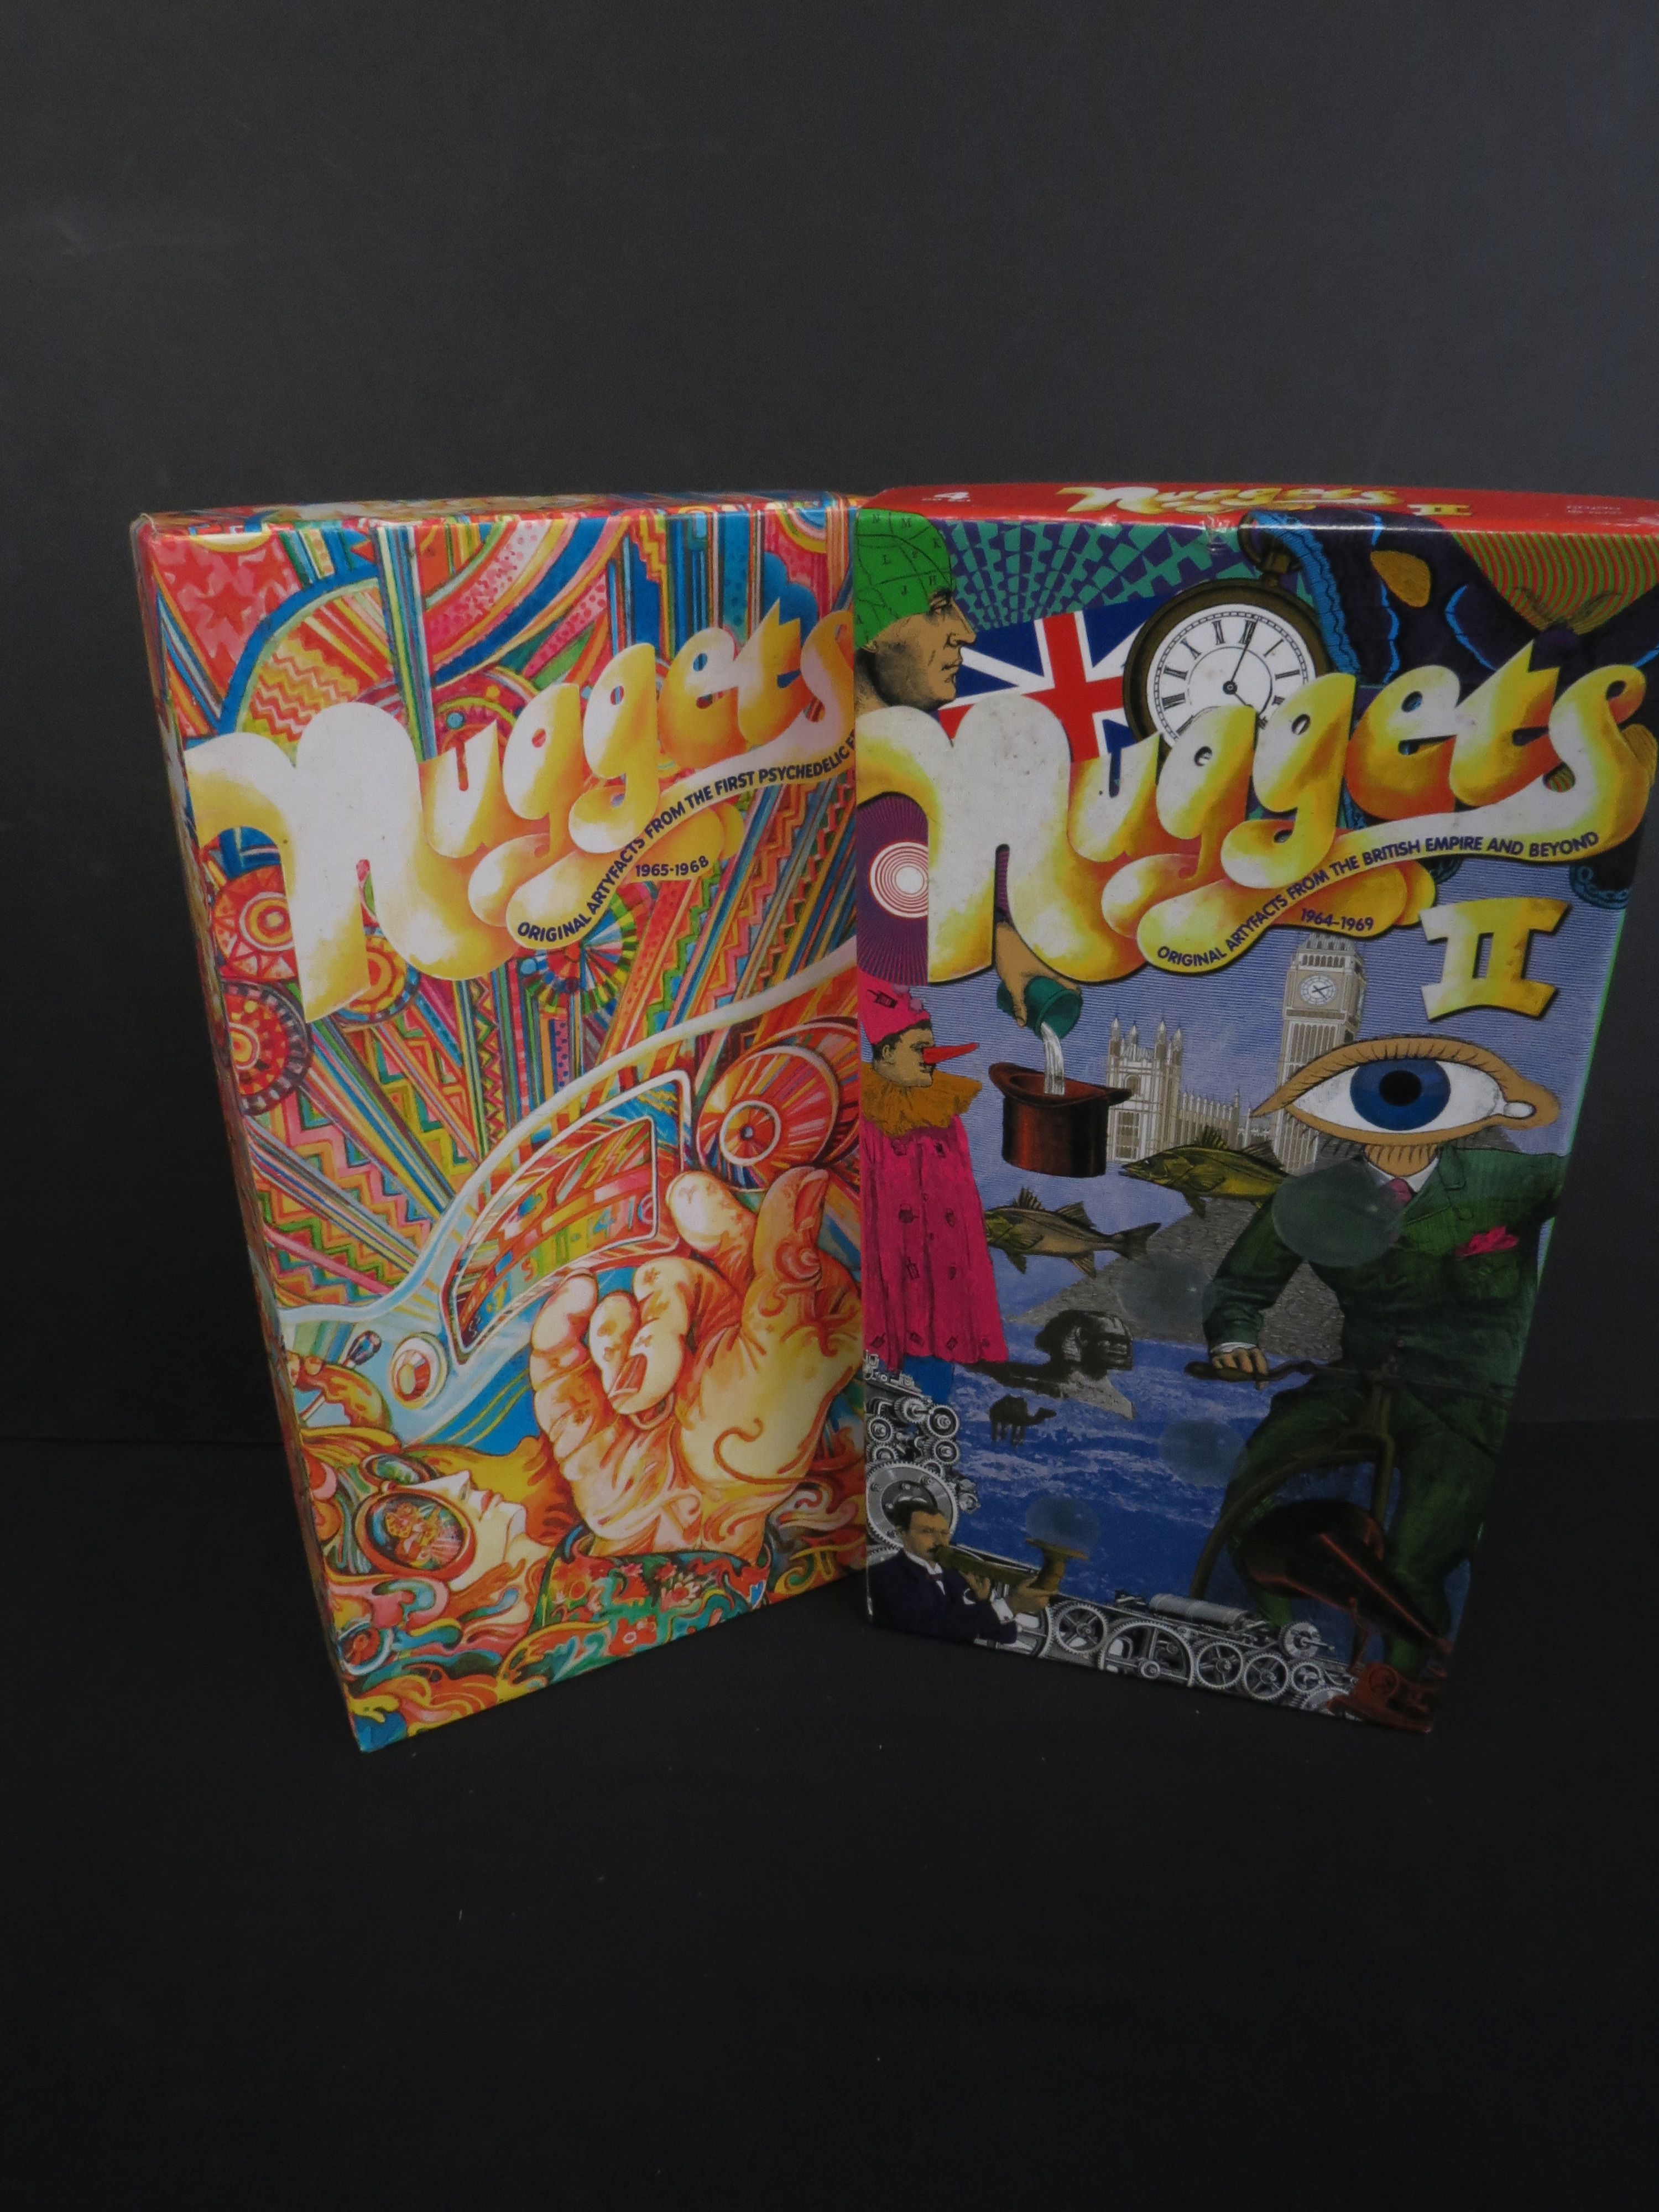 CDs - Two Nuggets CD Box Sets to include 1965-1968 & ii 1964-1969, some box marks but vg overall